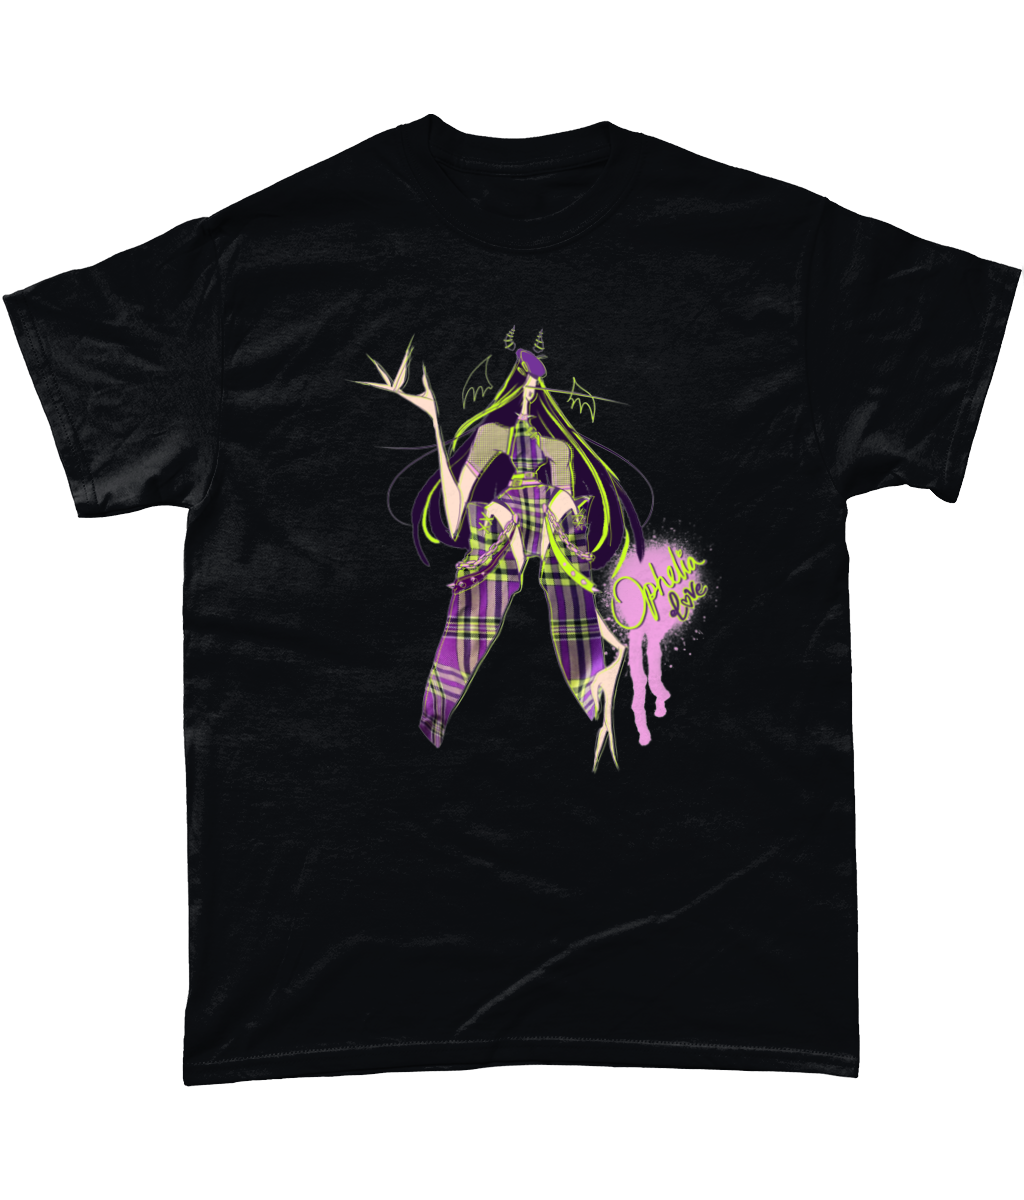 OPHELIA LOVE - Official Tee